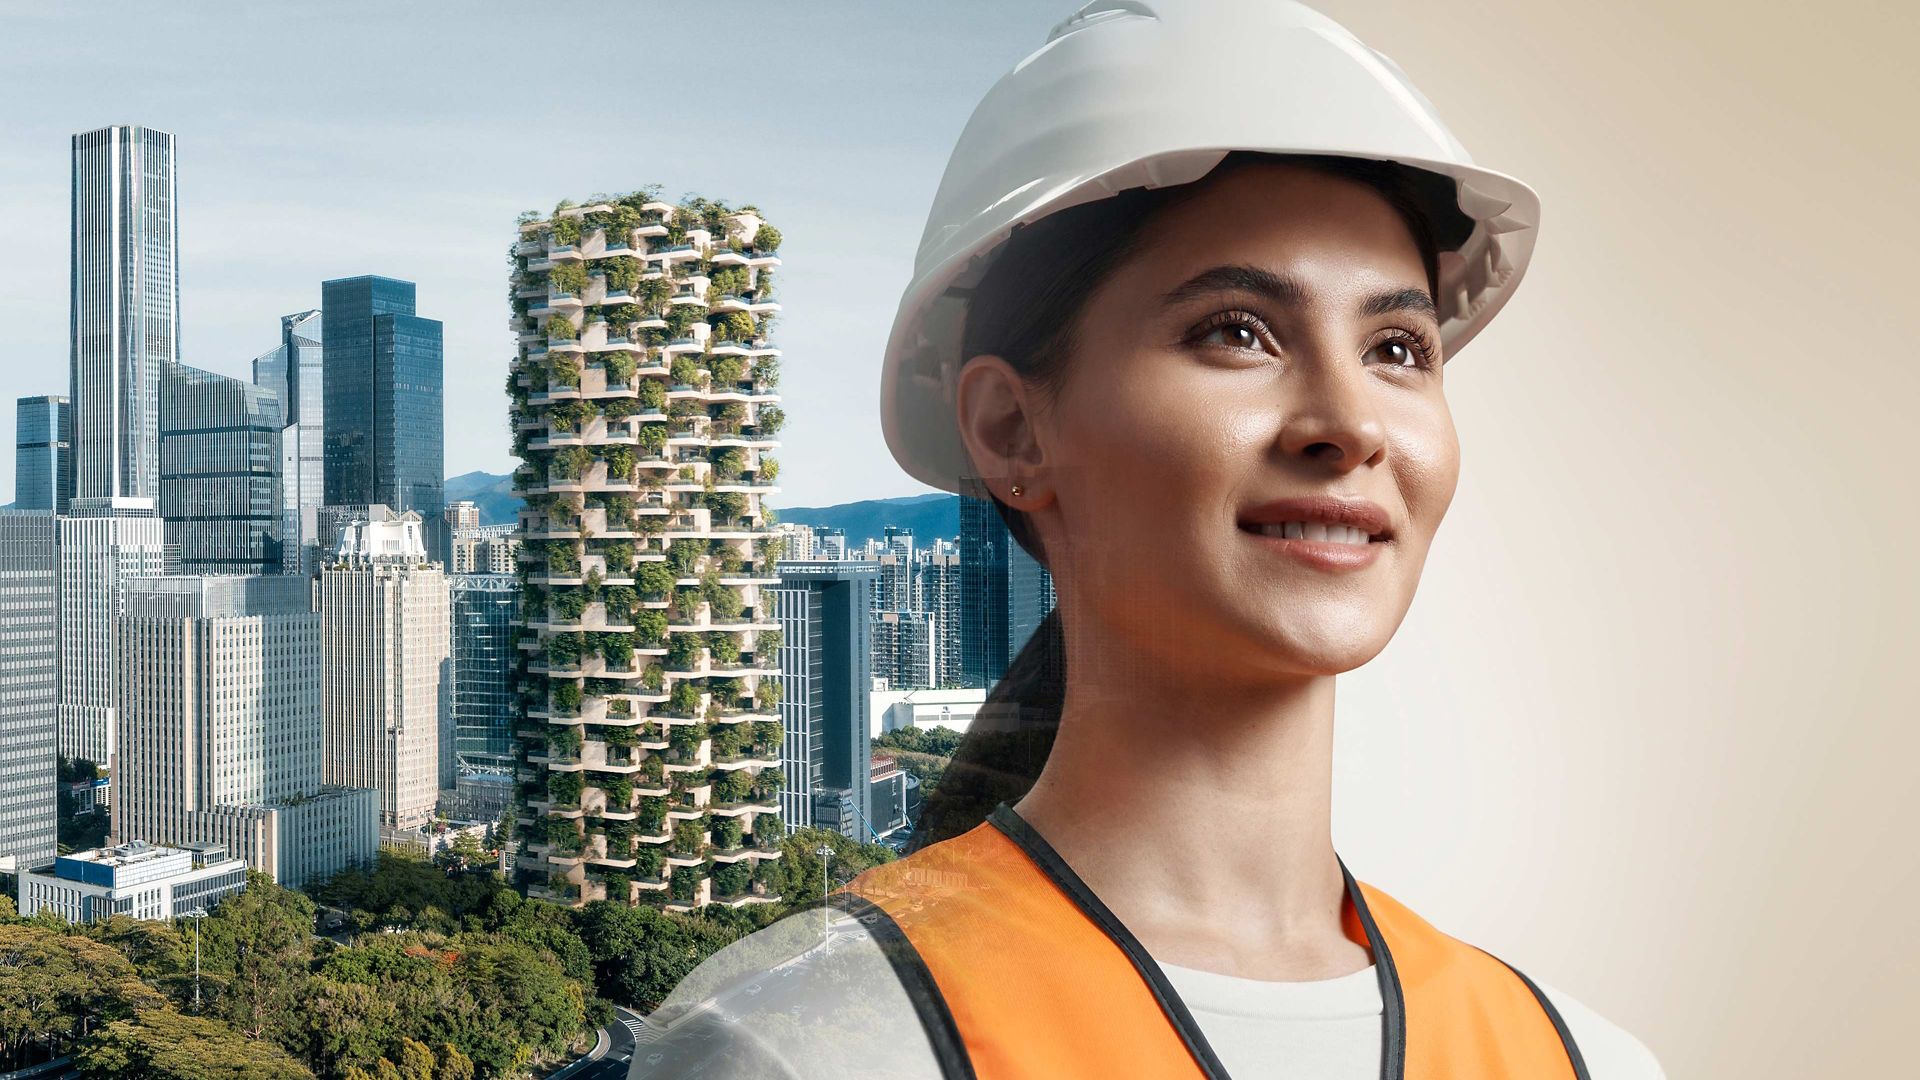 Woman with a city in the background, with green park, green roofs and high-rise buildings